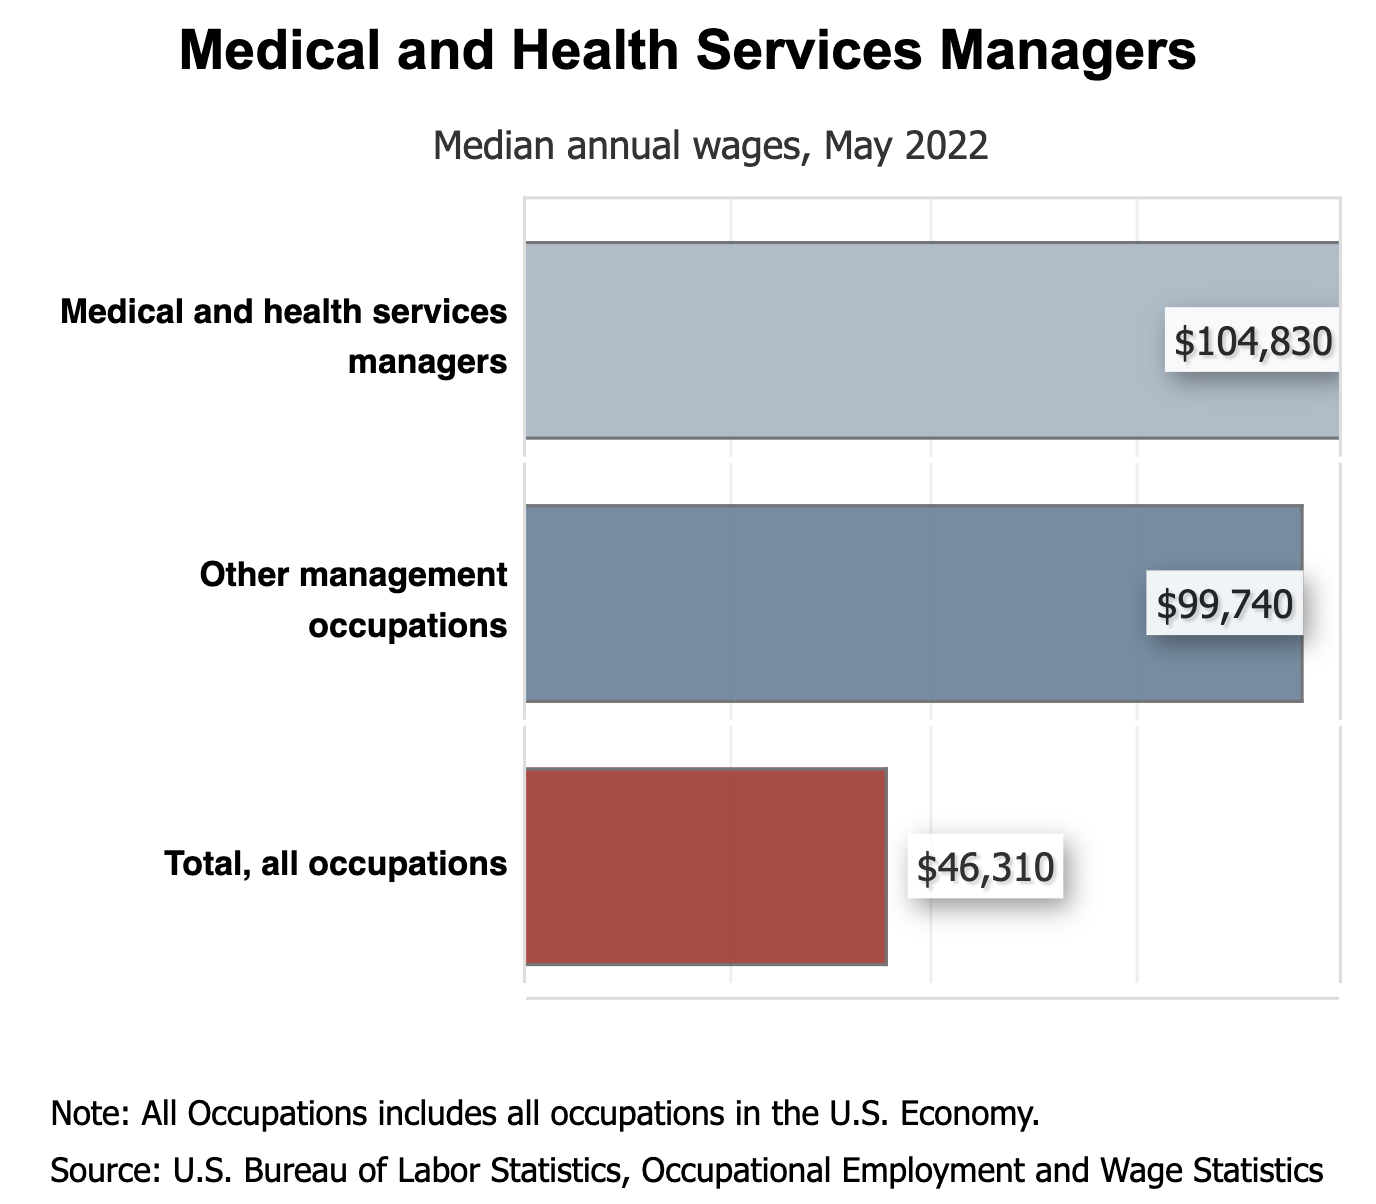 A bar chart comparing the median annual wages of medical and health services managers, other management occupations, and the total median annual wage of all occupations. 